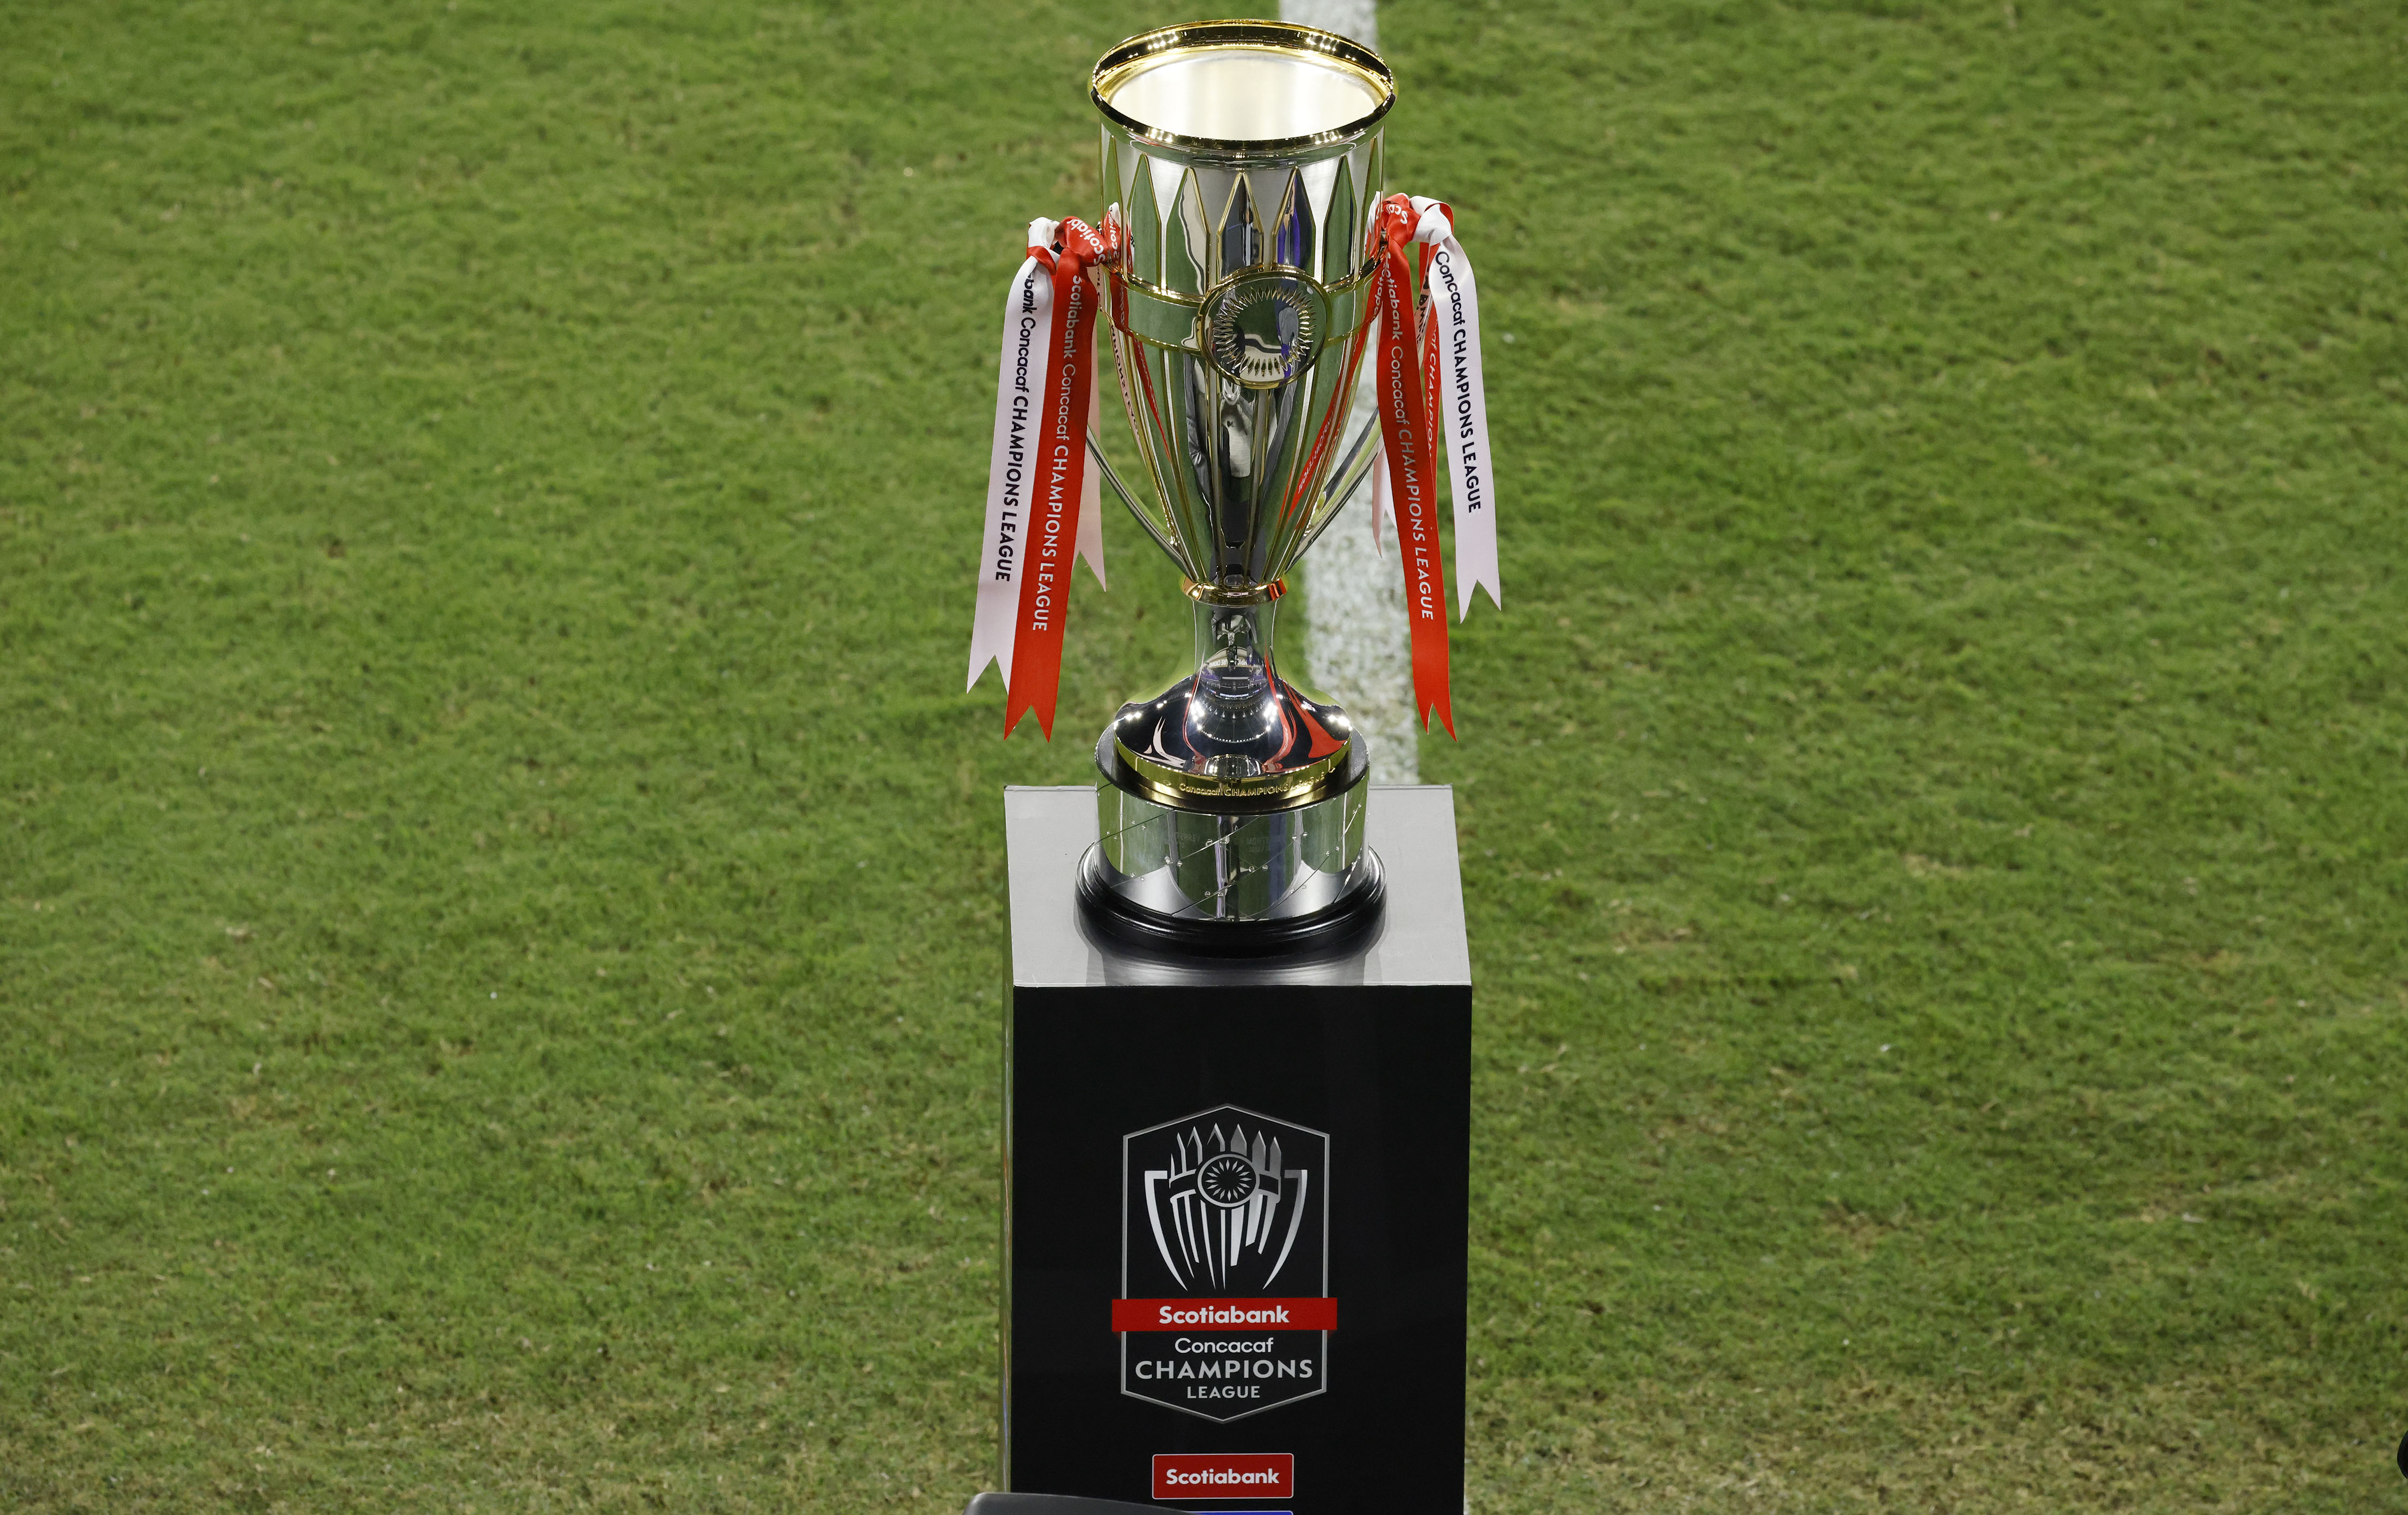 Soccer: 2020 Scotiabank Concacaf Champions League - Final-Los Angeles FC at Tigres UANL